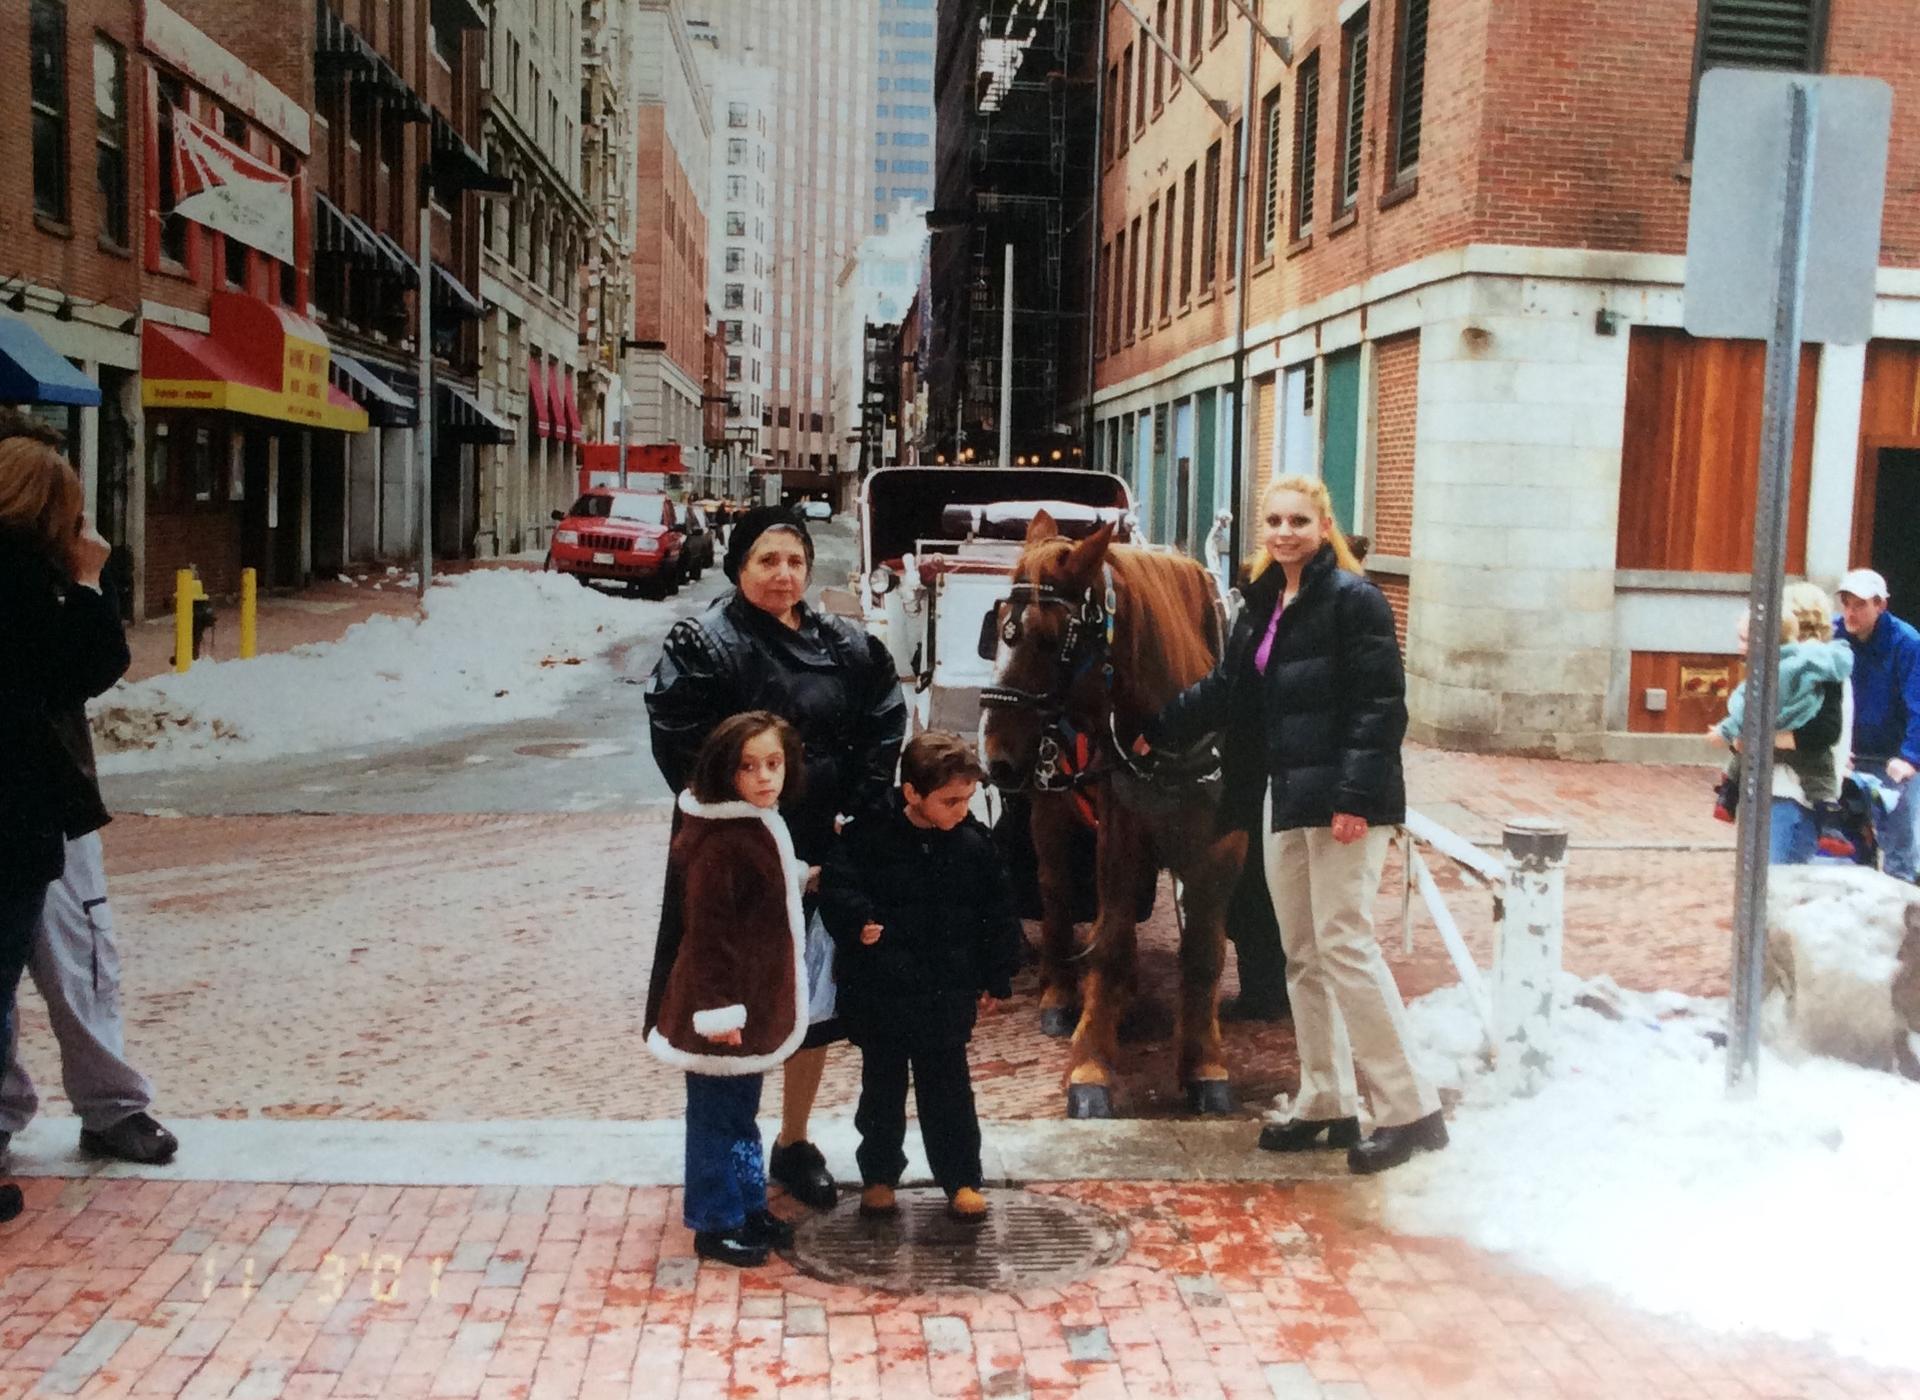 Family photo of three children with elderly woman outdoors in city street